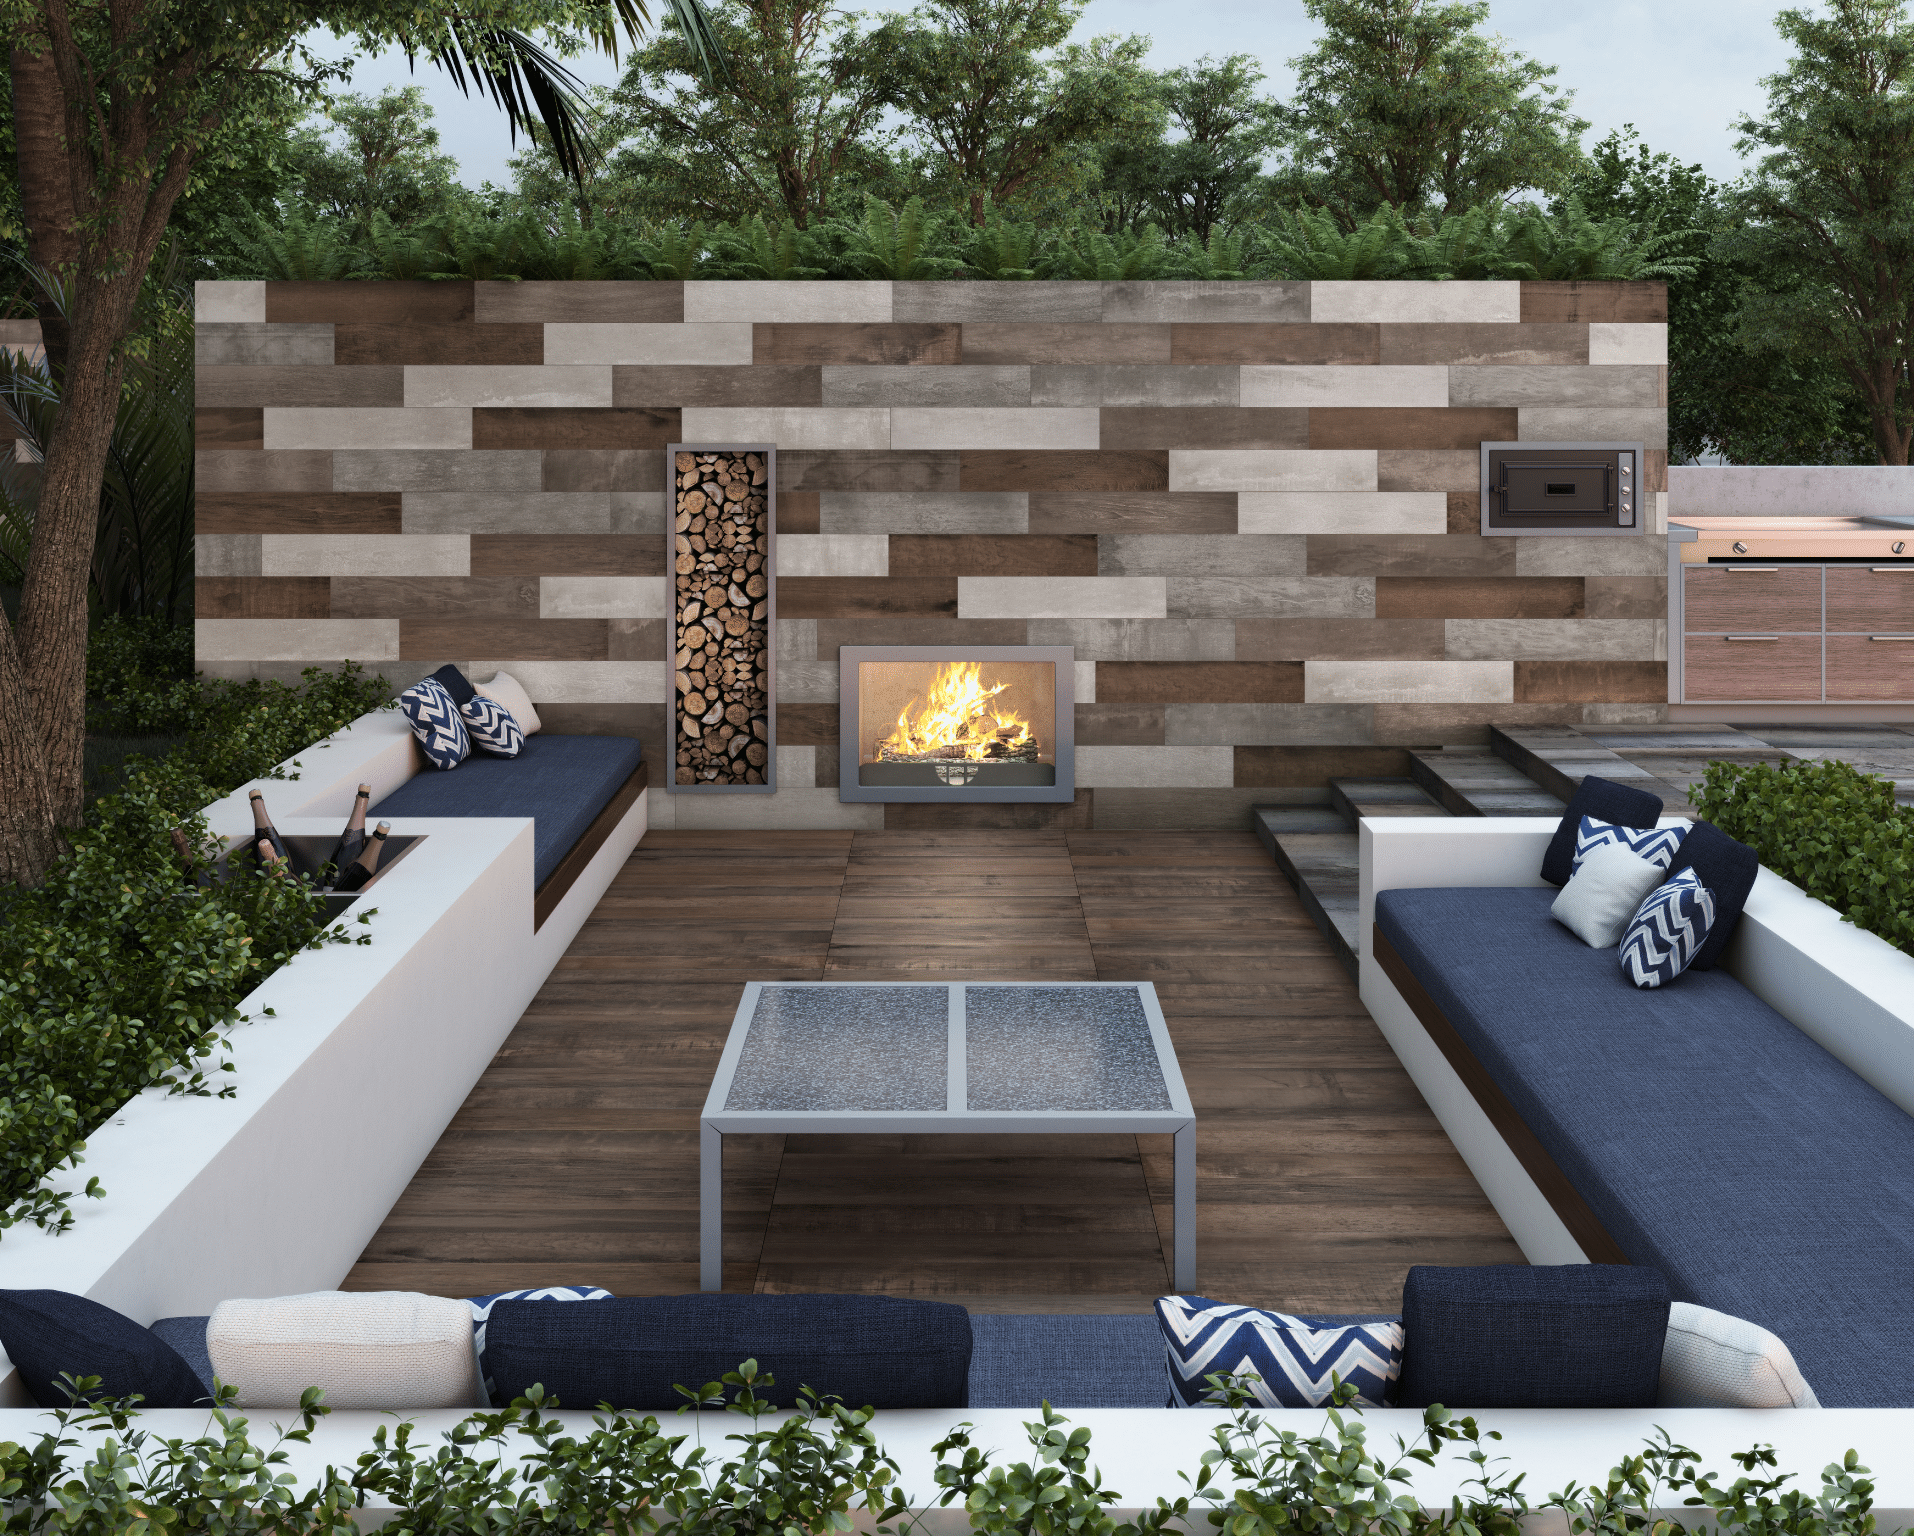 Wood-look tile in an outdoor kitchen